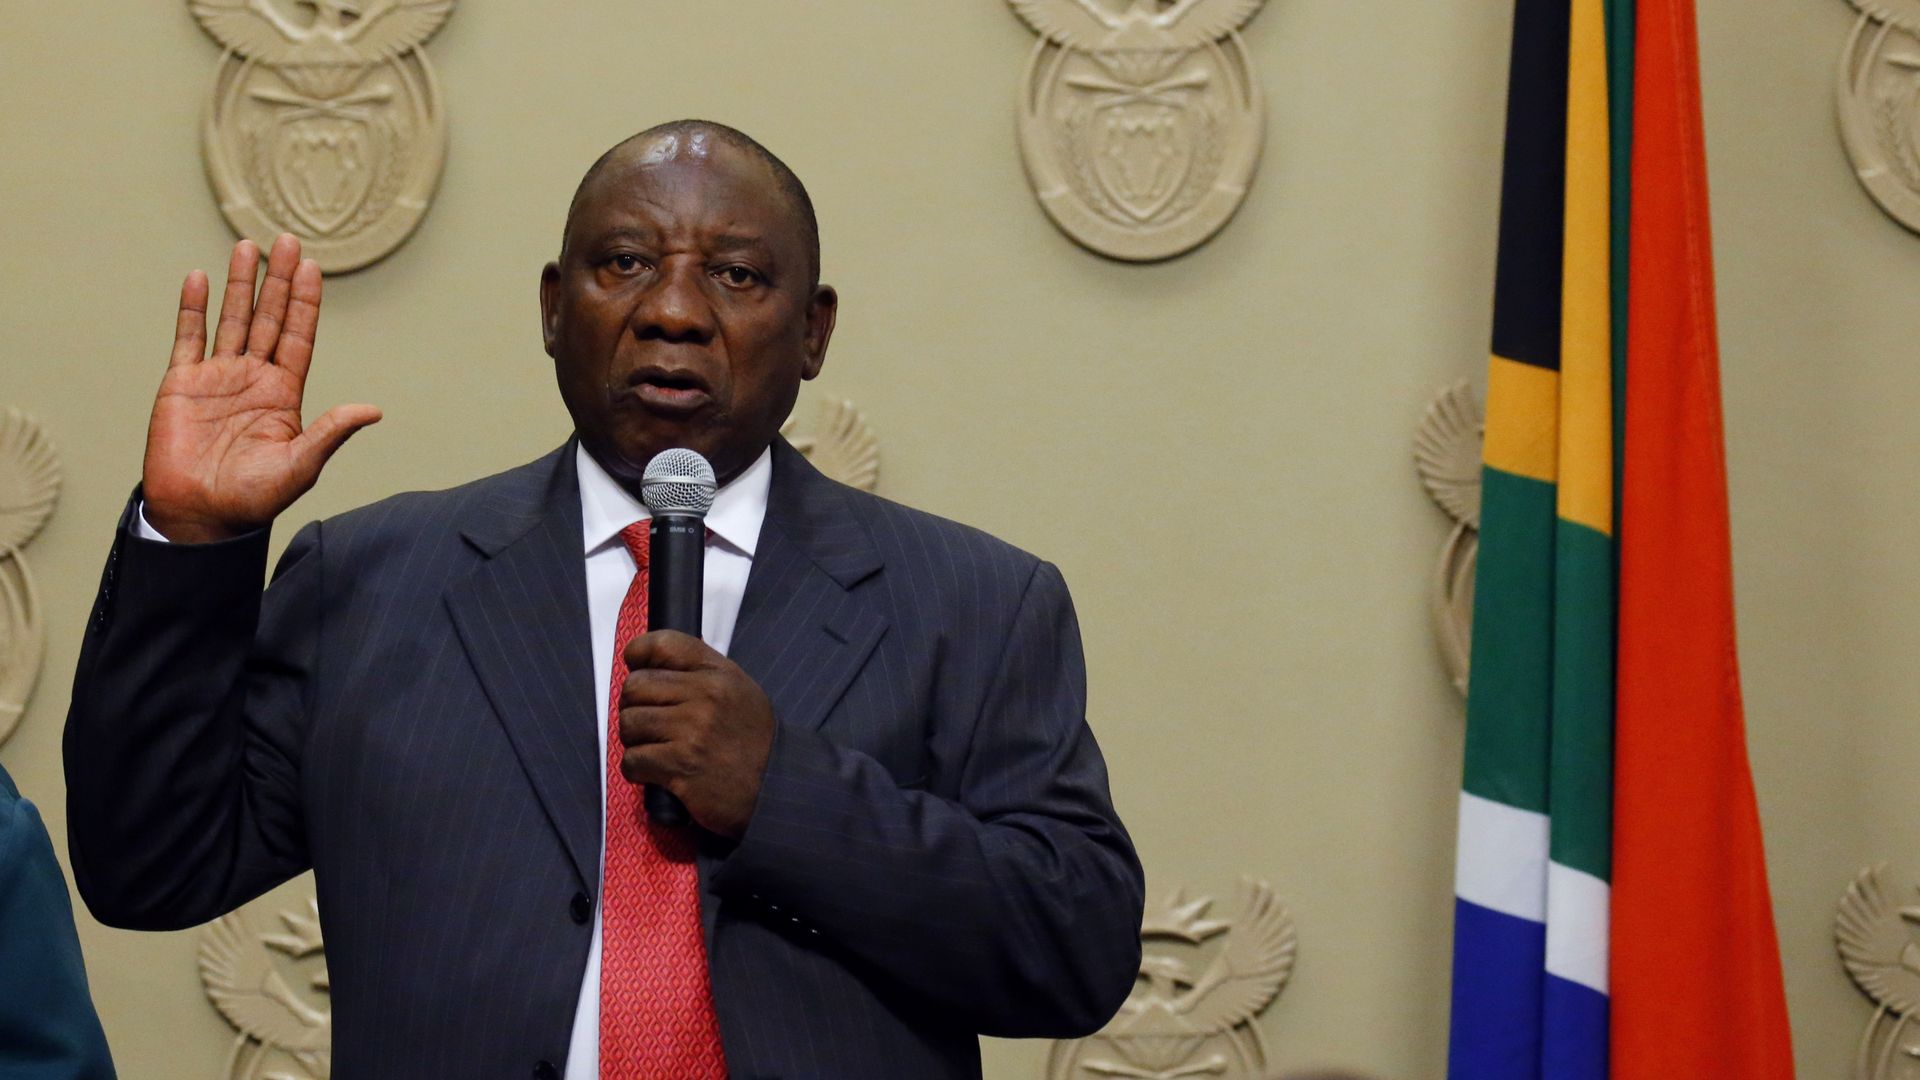 South Africa's new president Cyril Ramaphosa.